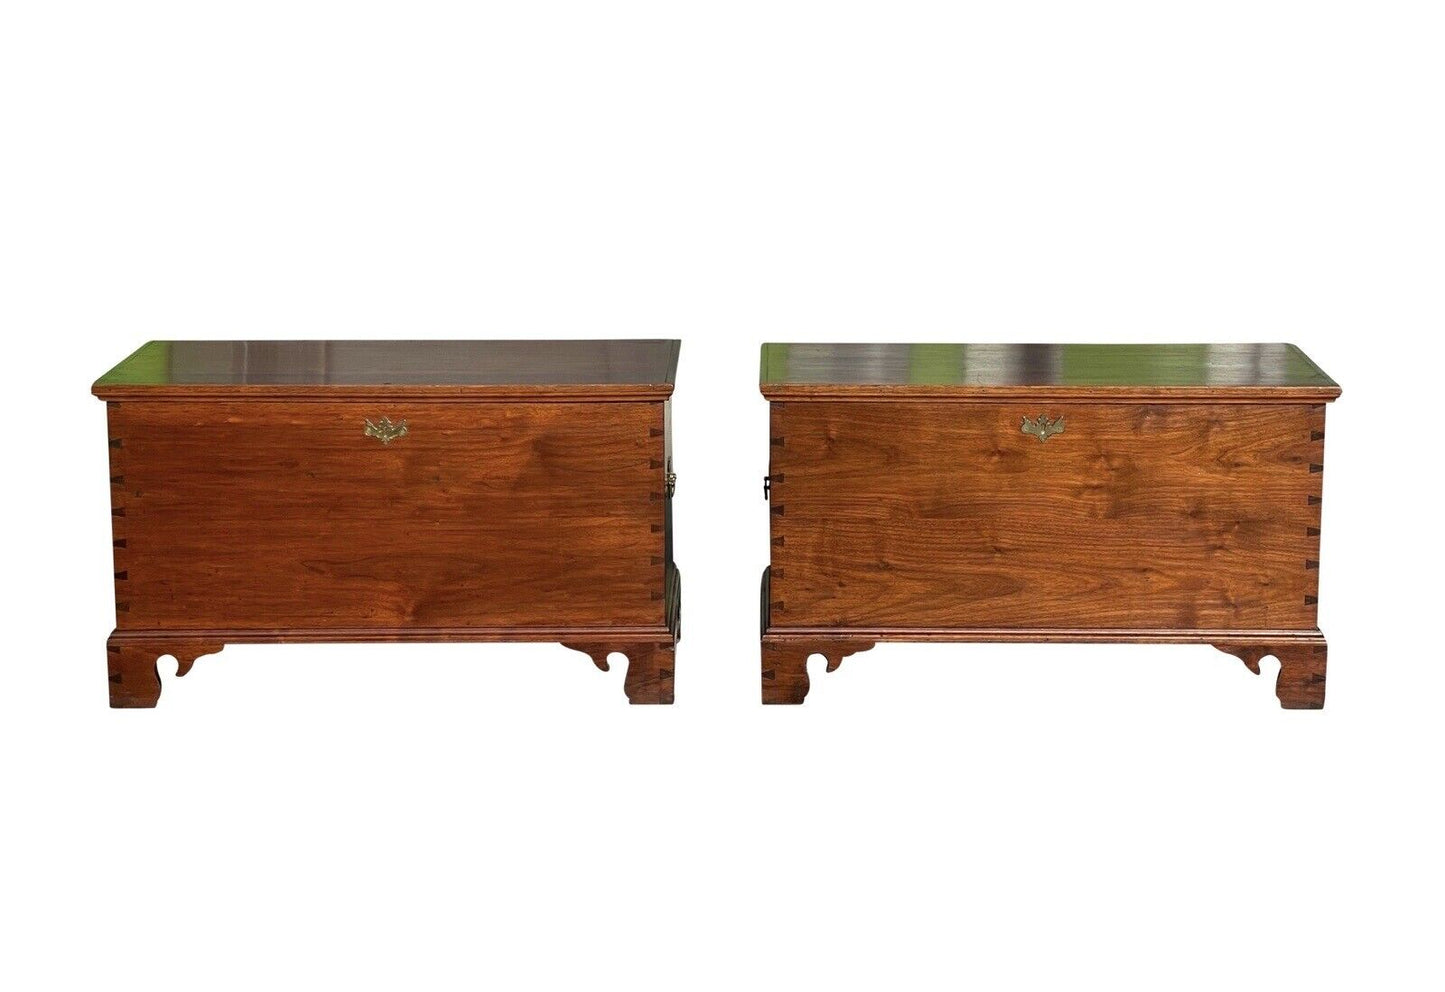 Pair of Queen Anne Style Pennsylvania Walnut Blanket Chests With Secret Interior